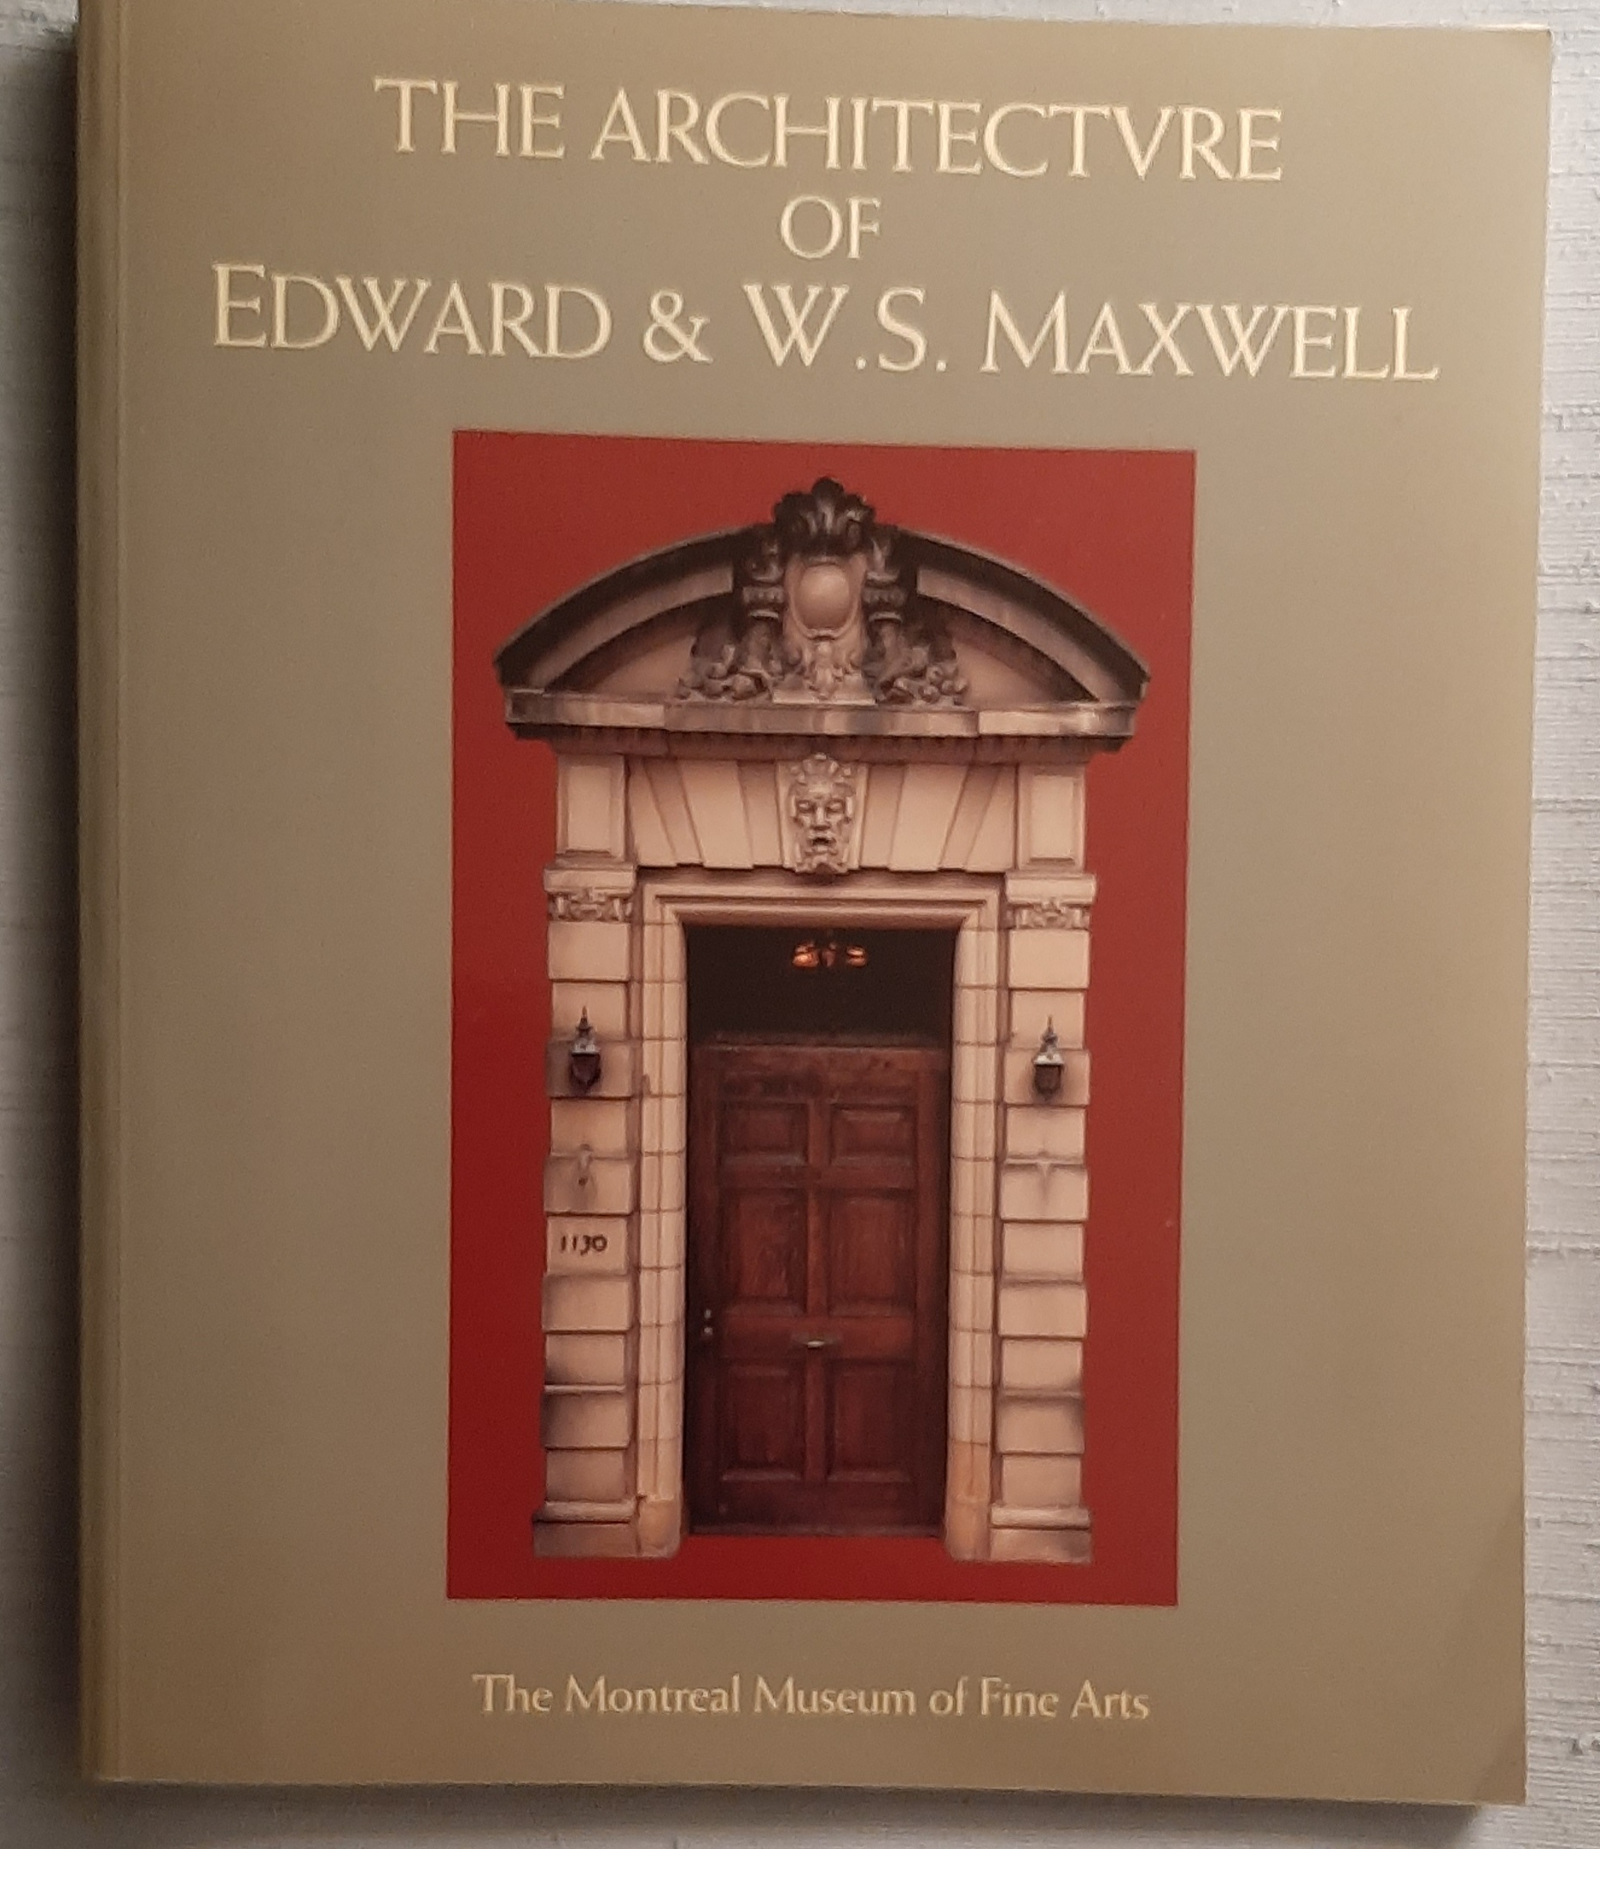 The Architecture of Edward & W. S. Maxwell